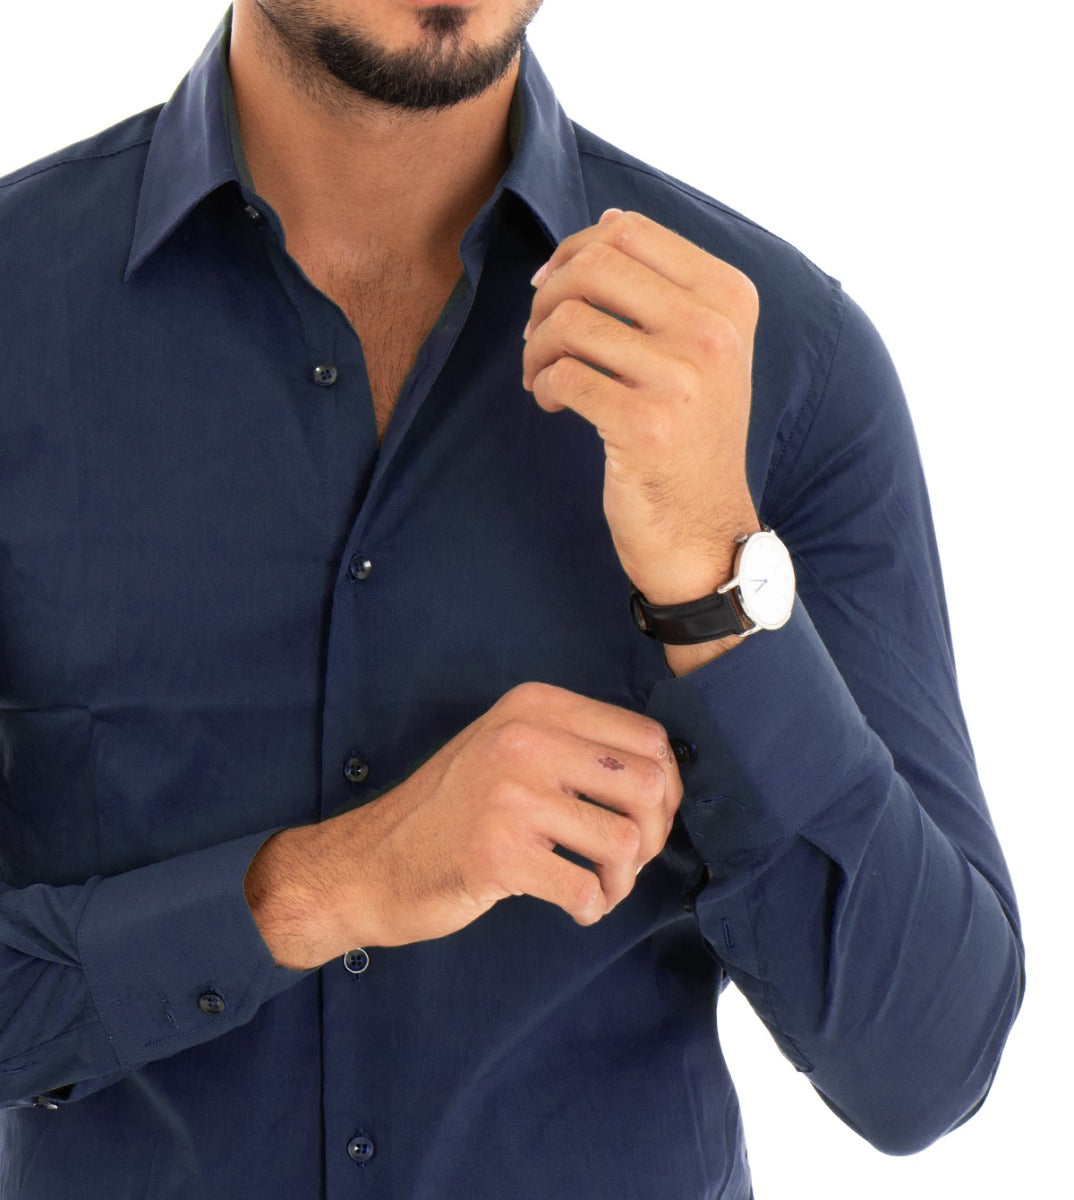 Men's Shirt With Collar Long Sleeve Slim Fit Basic Casual Cotton Blue GIOSAL-C1809A